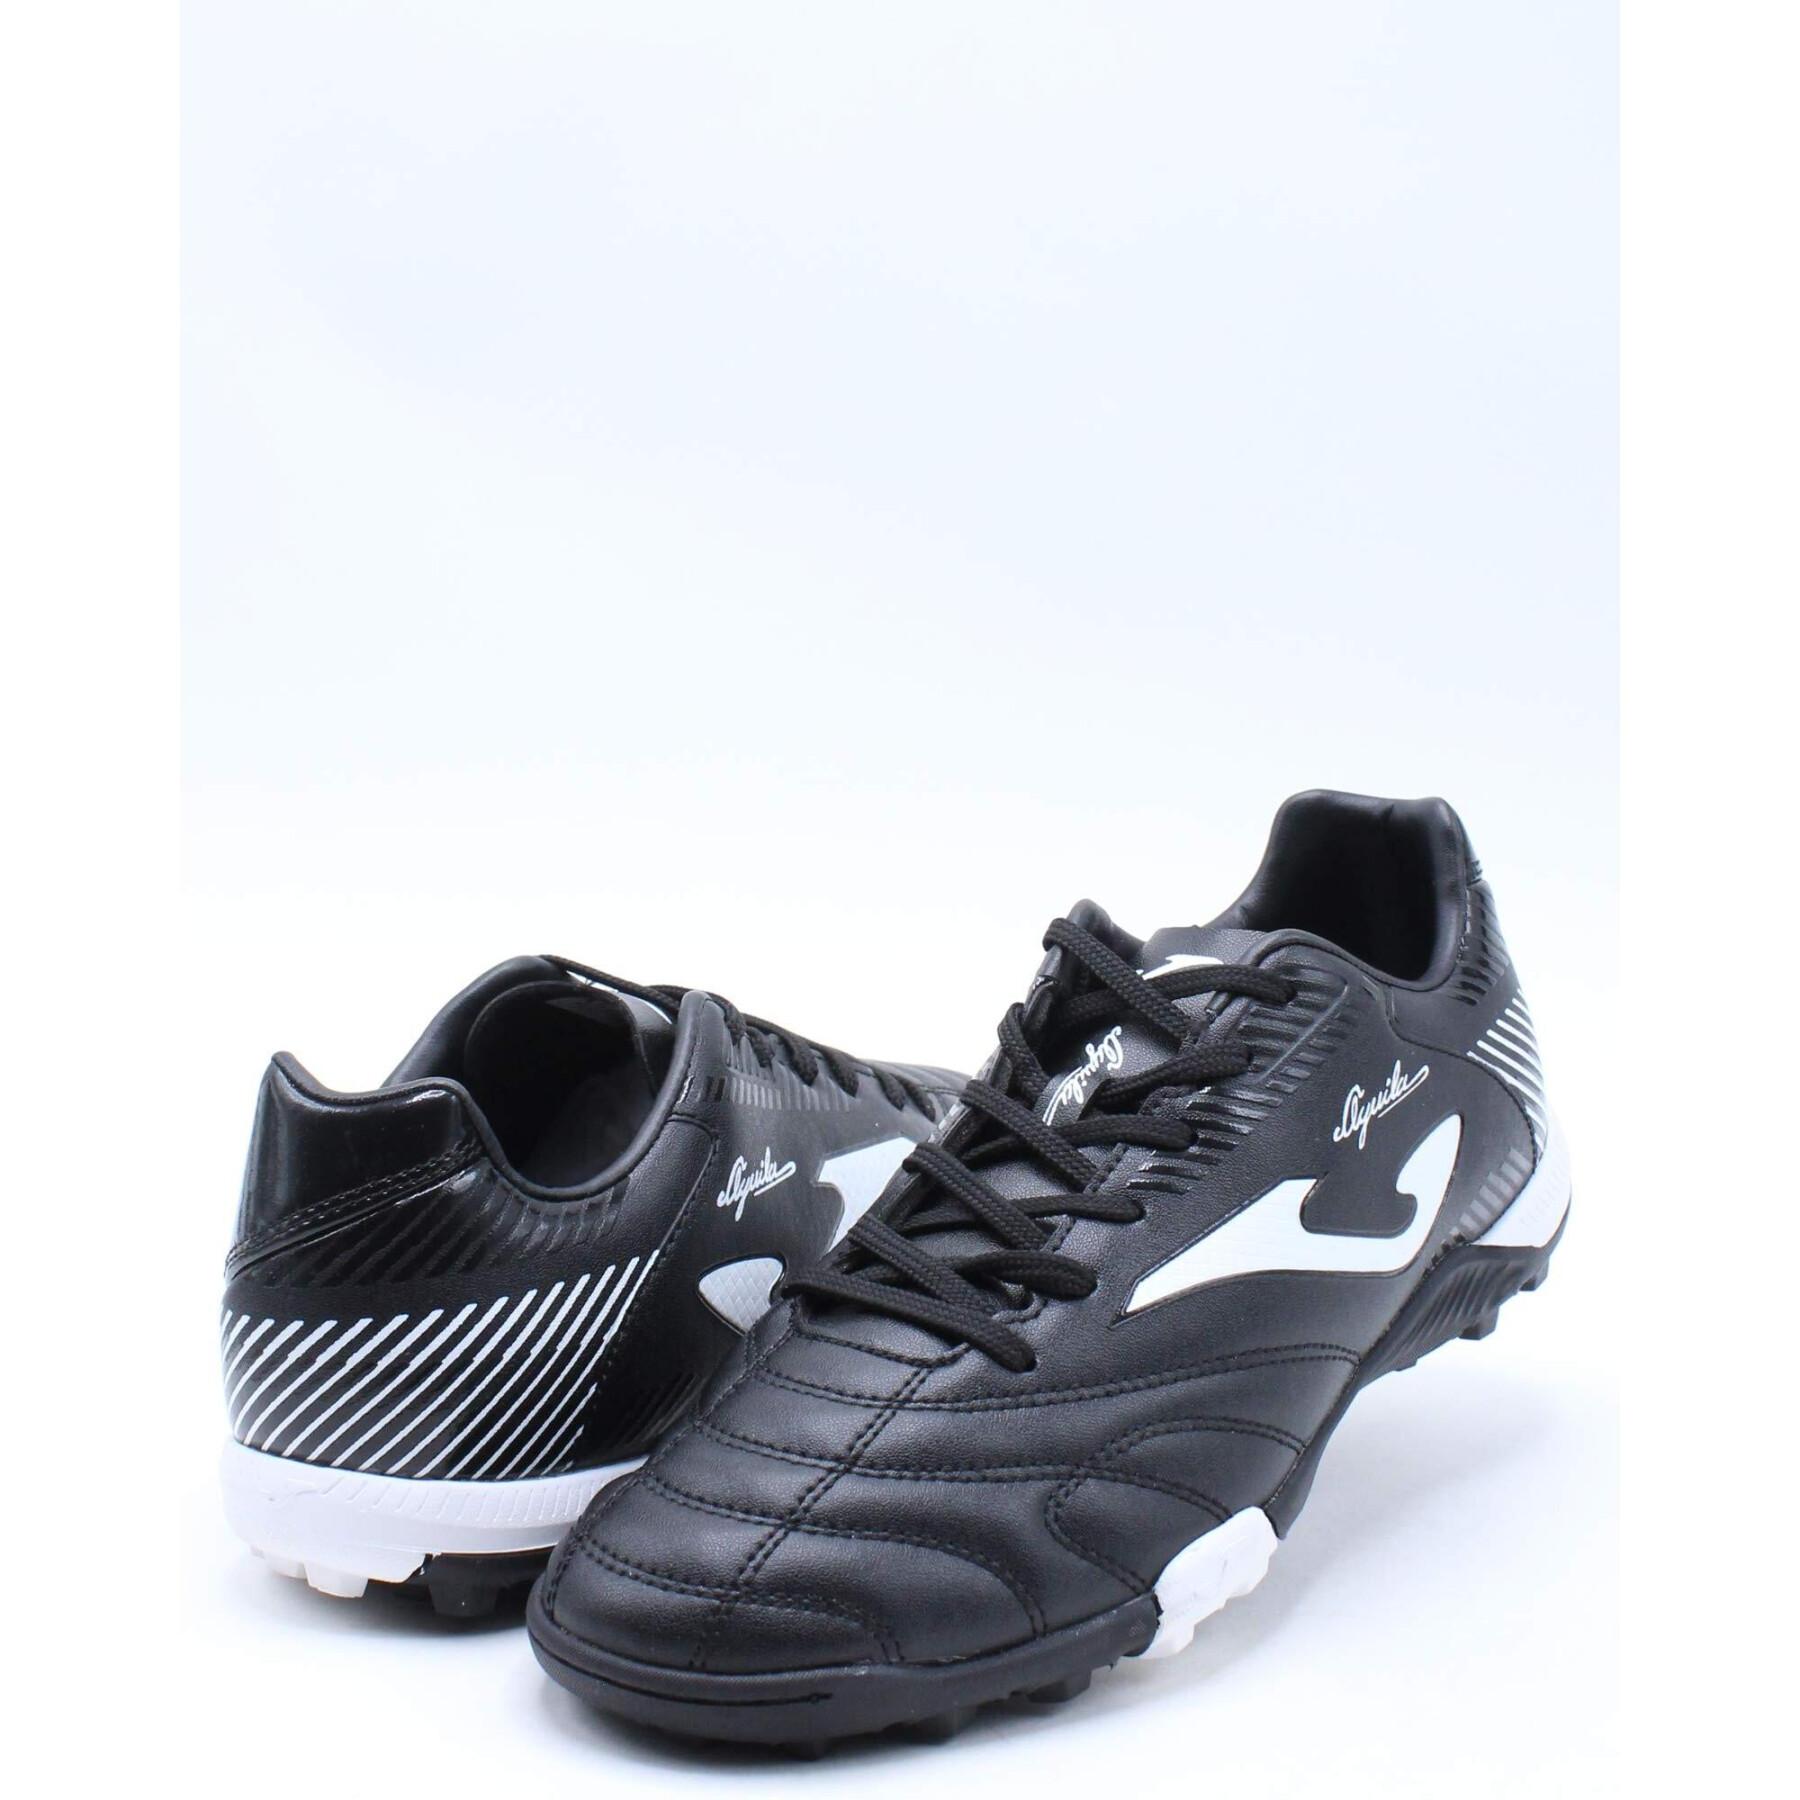 Chaussures Joma Aguila Turf 2001